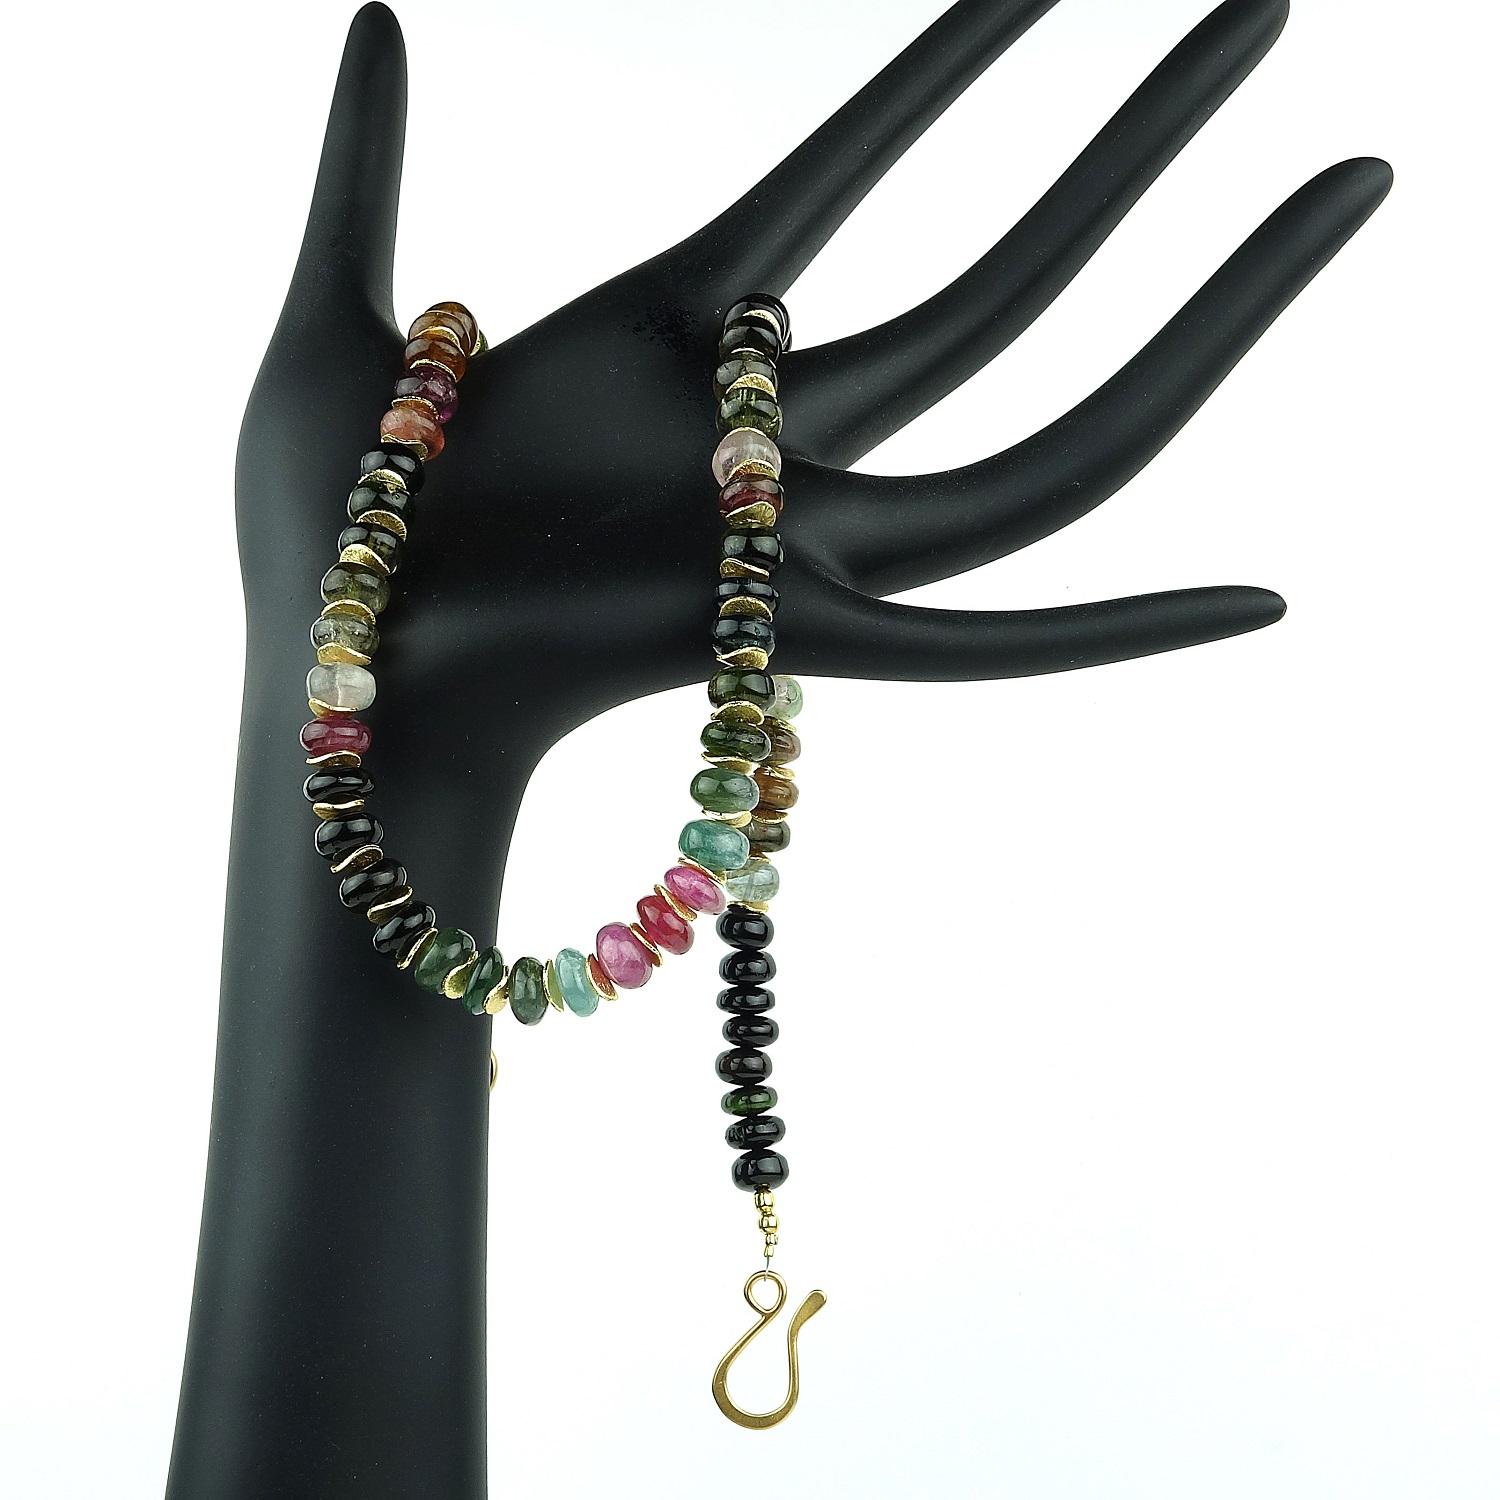 Custom made, multi color highly polished Tourmaline rondel necklace.  The colors of these gorgeous Tourmalines are highlighted with flirty, fluttery gold tone accents.  The 19.5 inch necklace length is perfect for sitting on your collar bone.  These